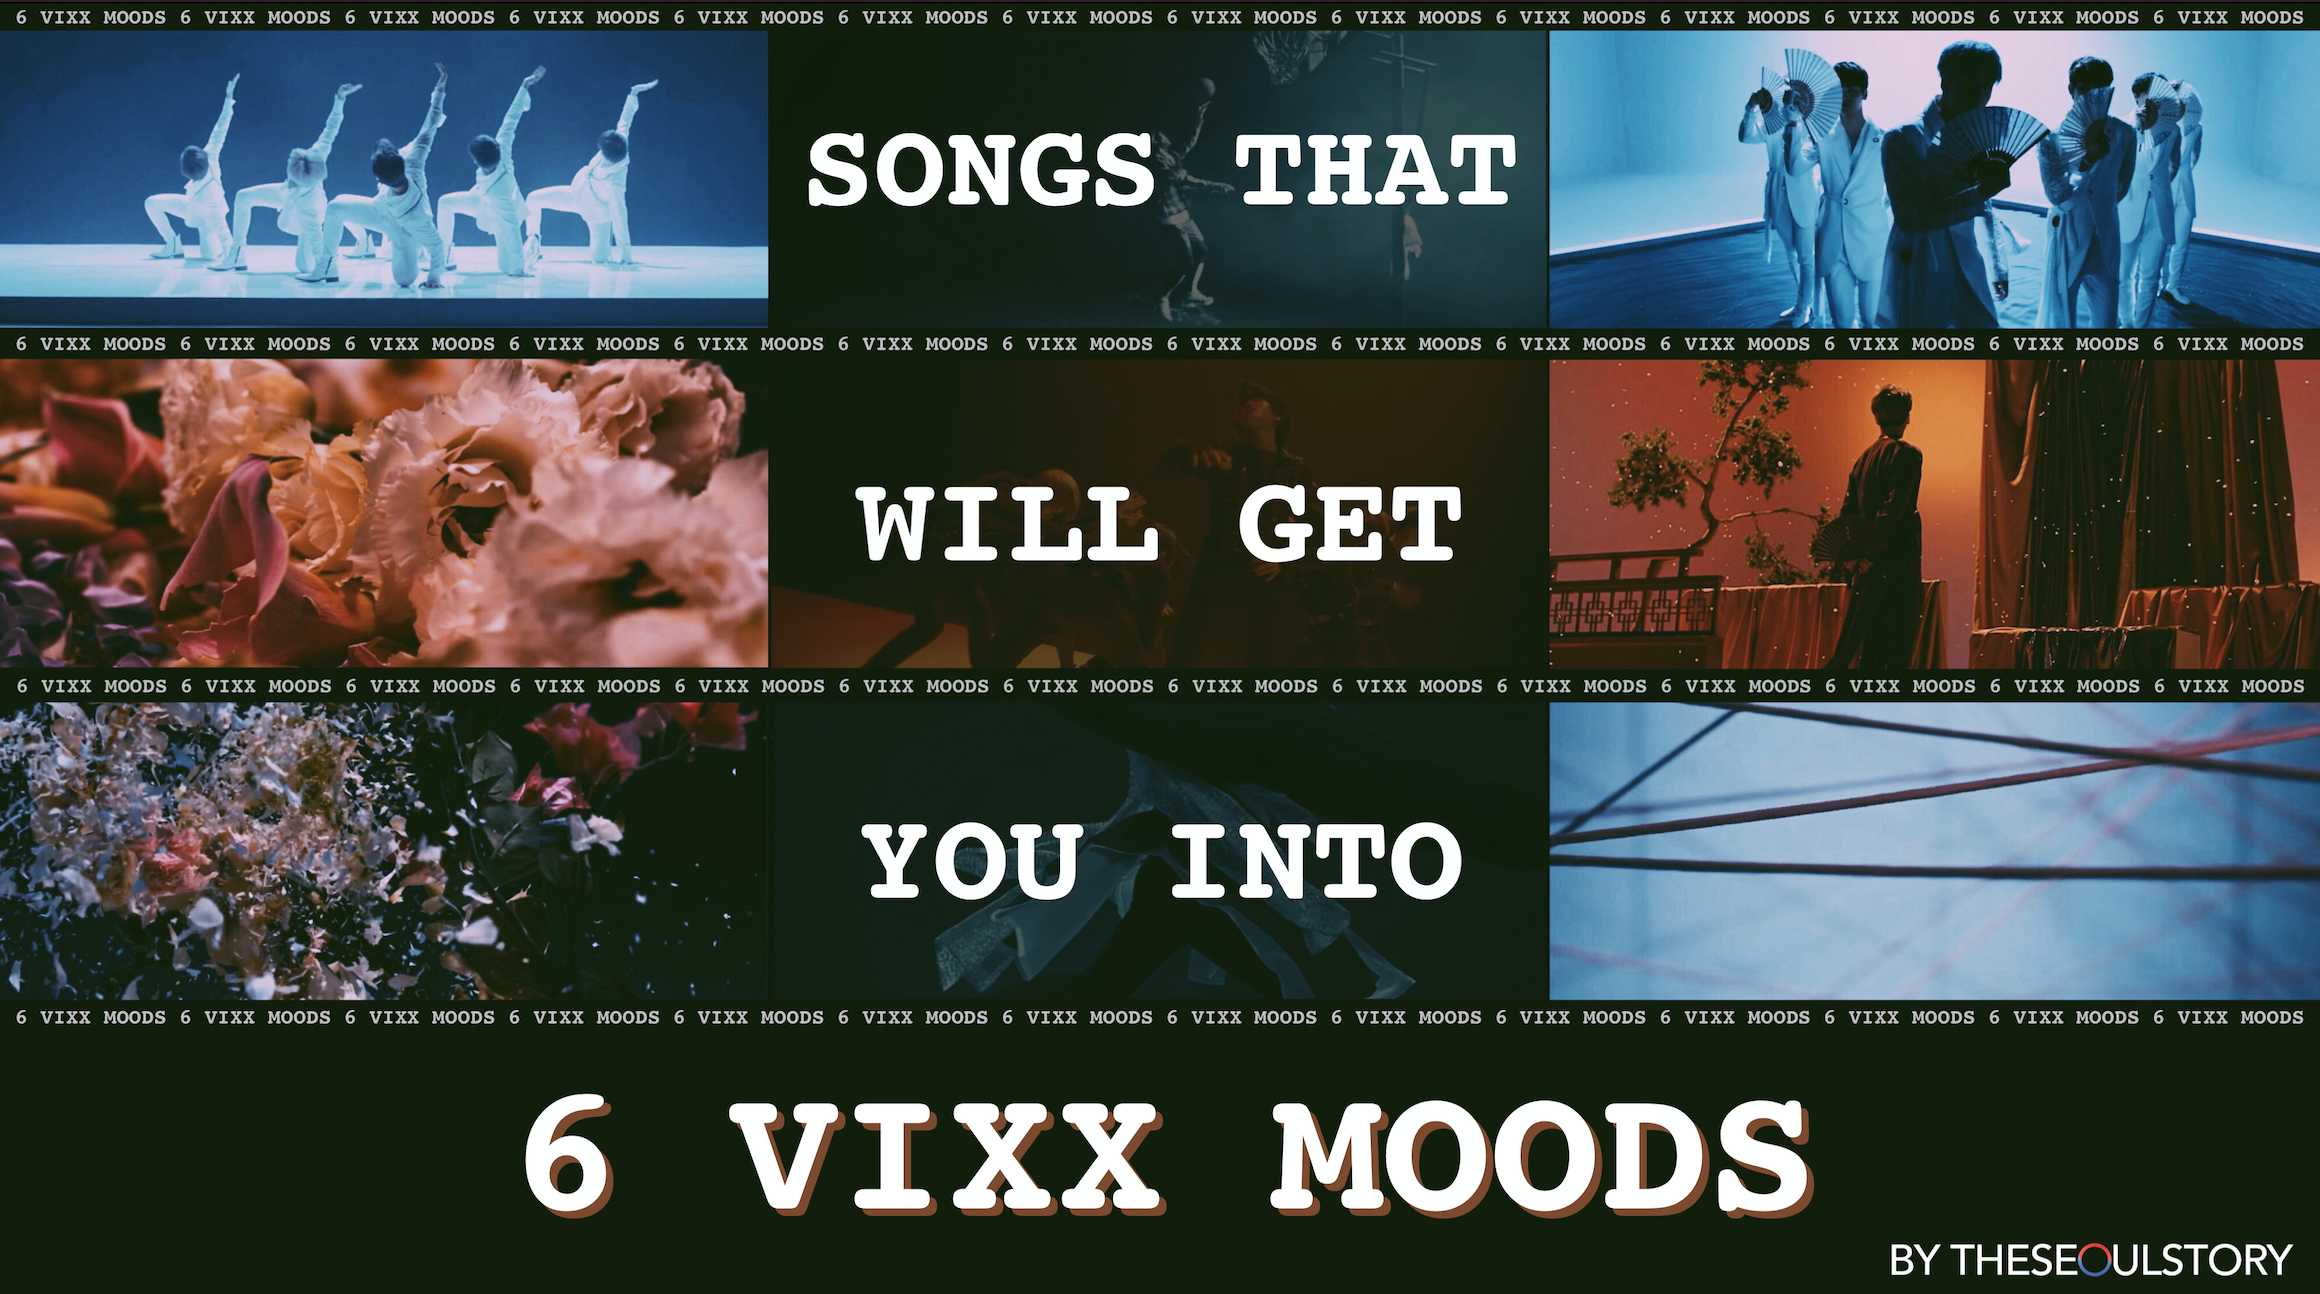 [FEATURE] Songs That Will Get You Into 6 VIXX Moods